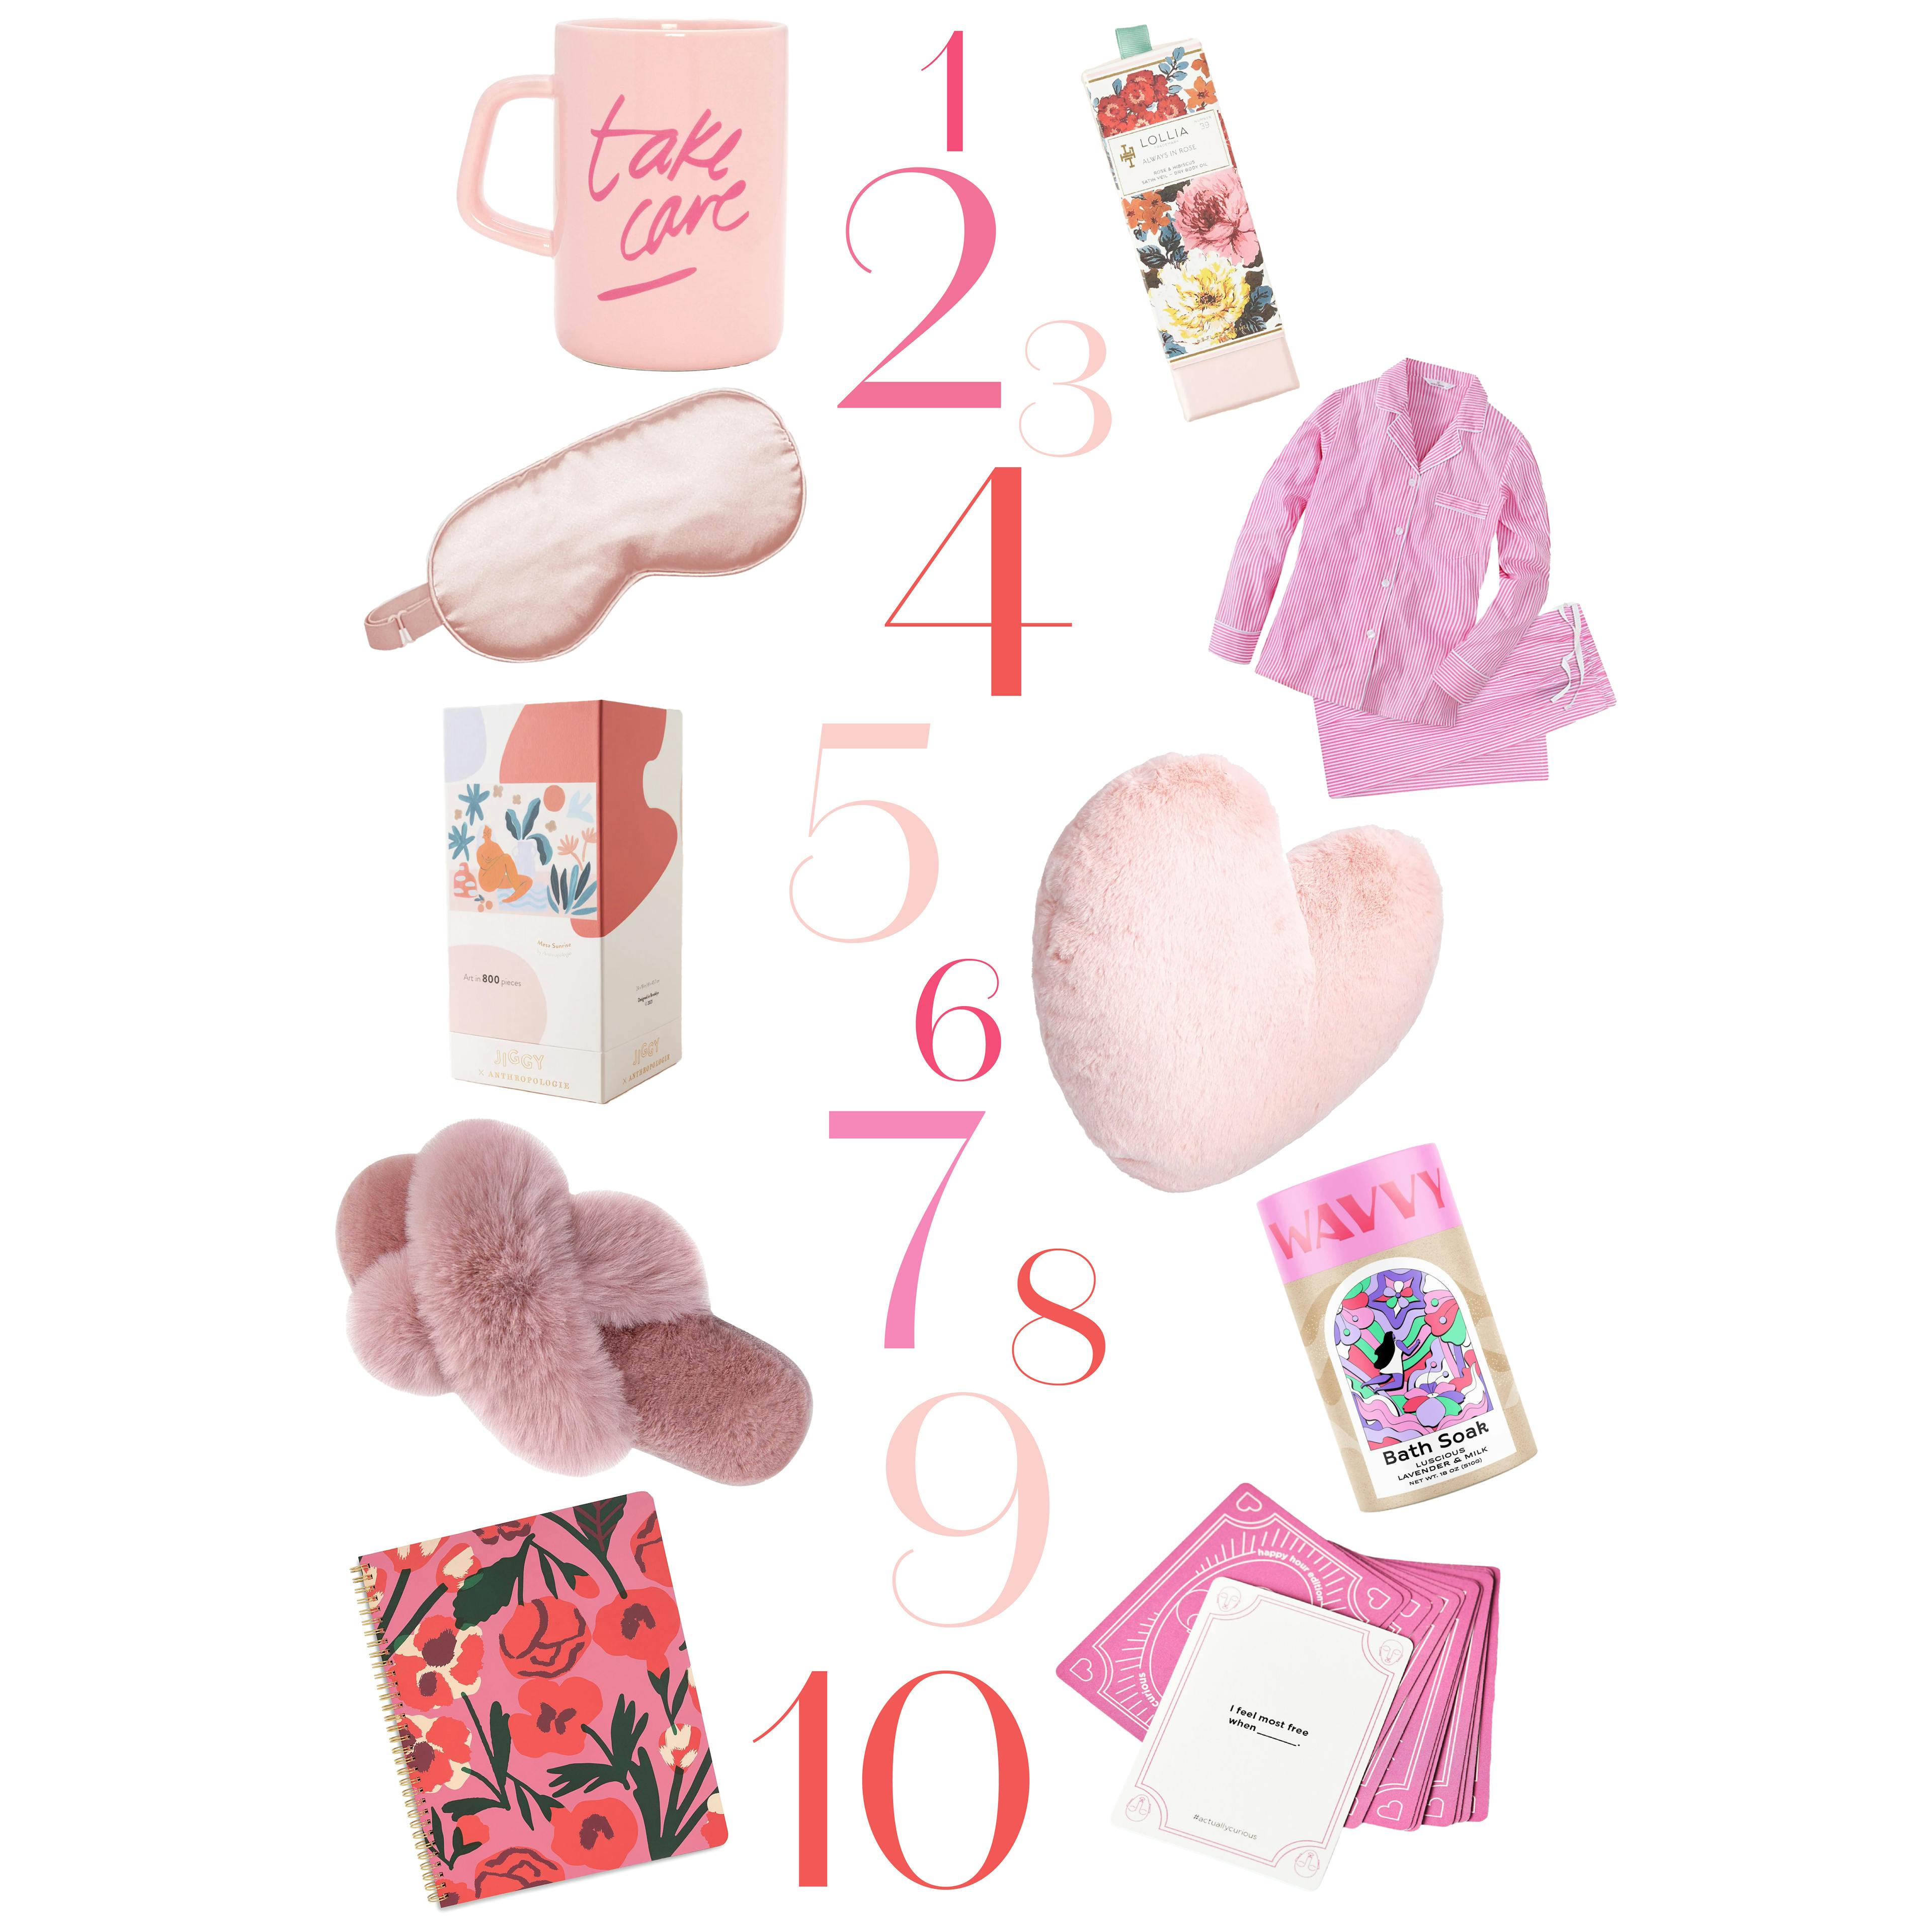 10 Best Gifts for Galentine's Day Desktop